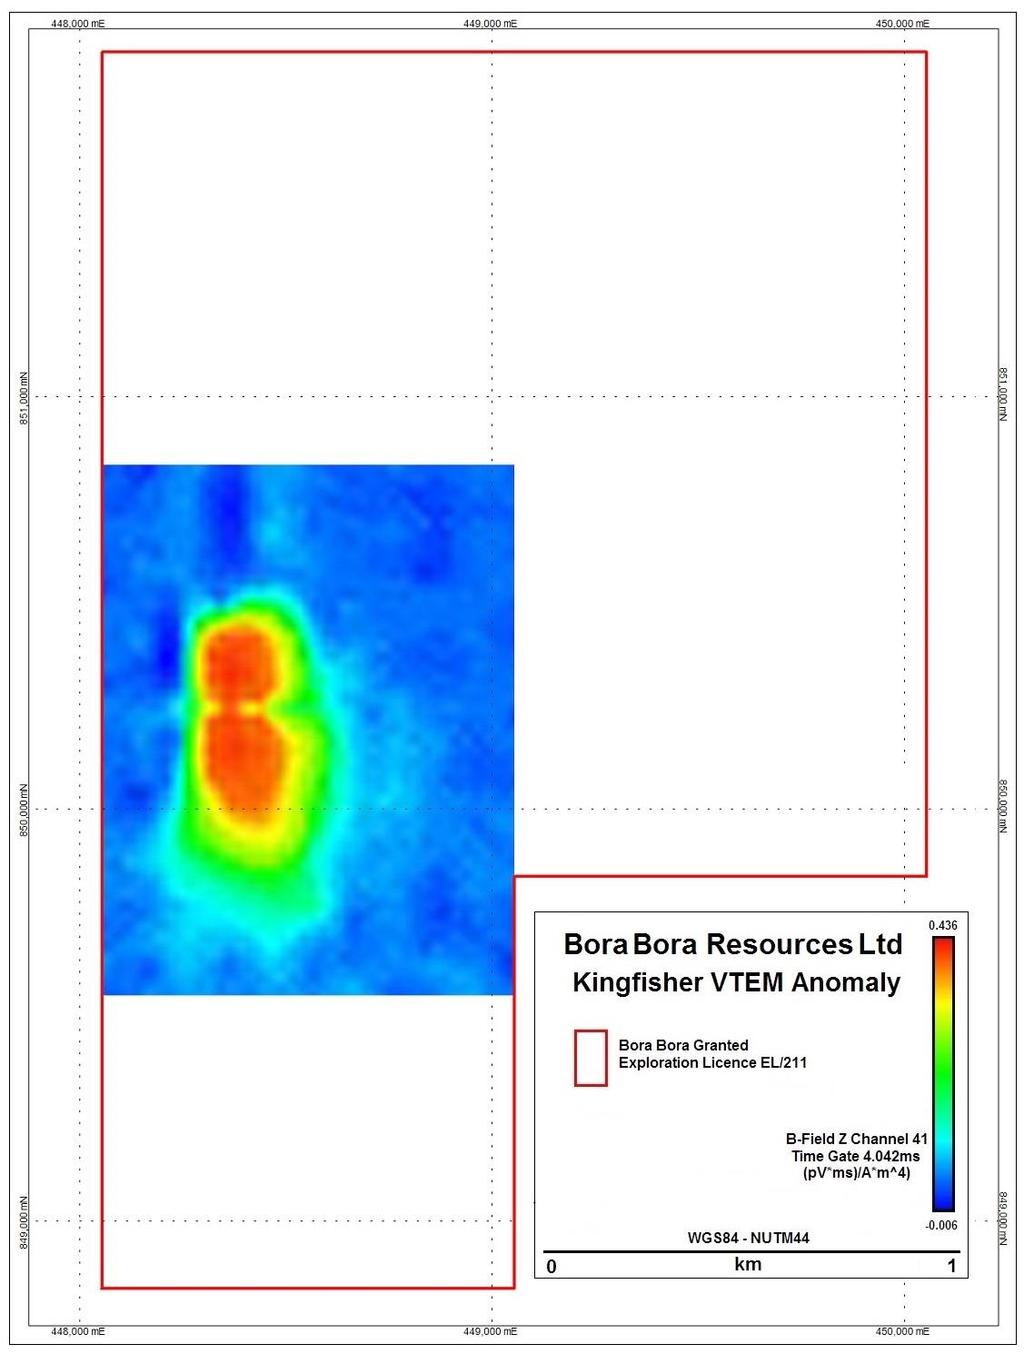 Figure 1: Kingfisher Prospect bullseye VTEM anomaly at the Matale/Kurunegala Graphite Project As displayed in Figure 1, the VTEM has revealed a clear bullseye anomaly with a similar intensity and